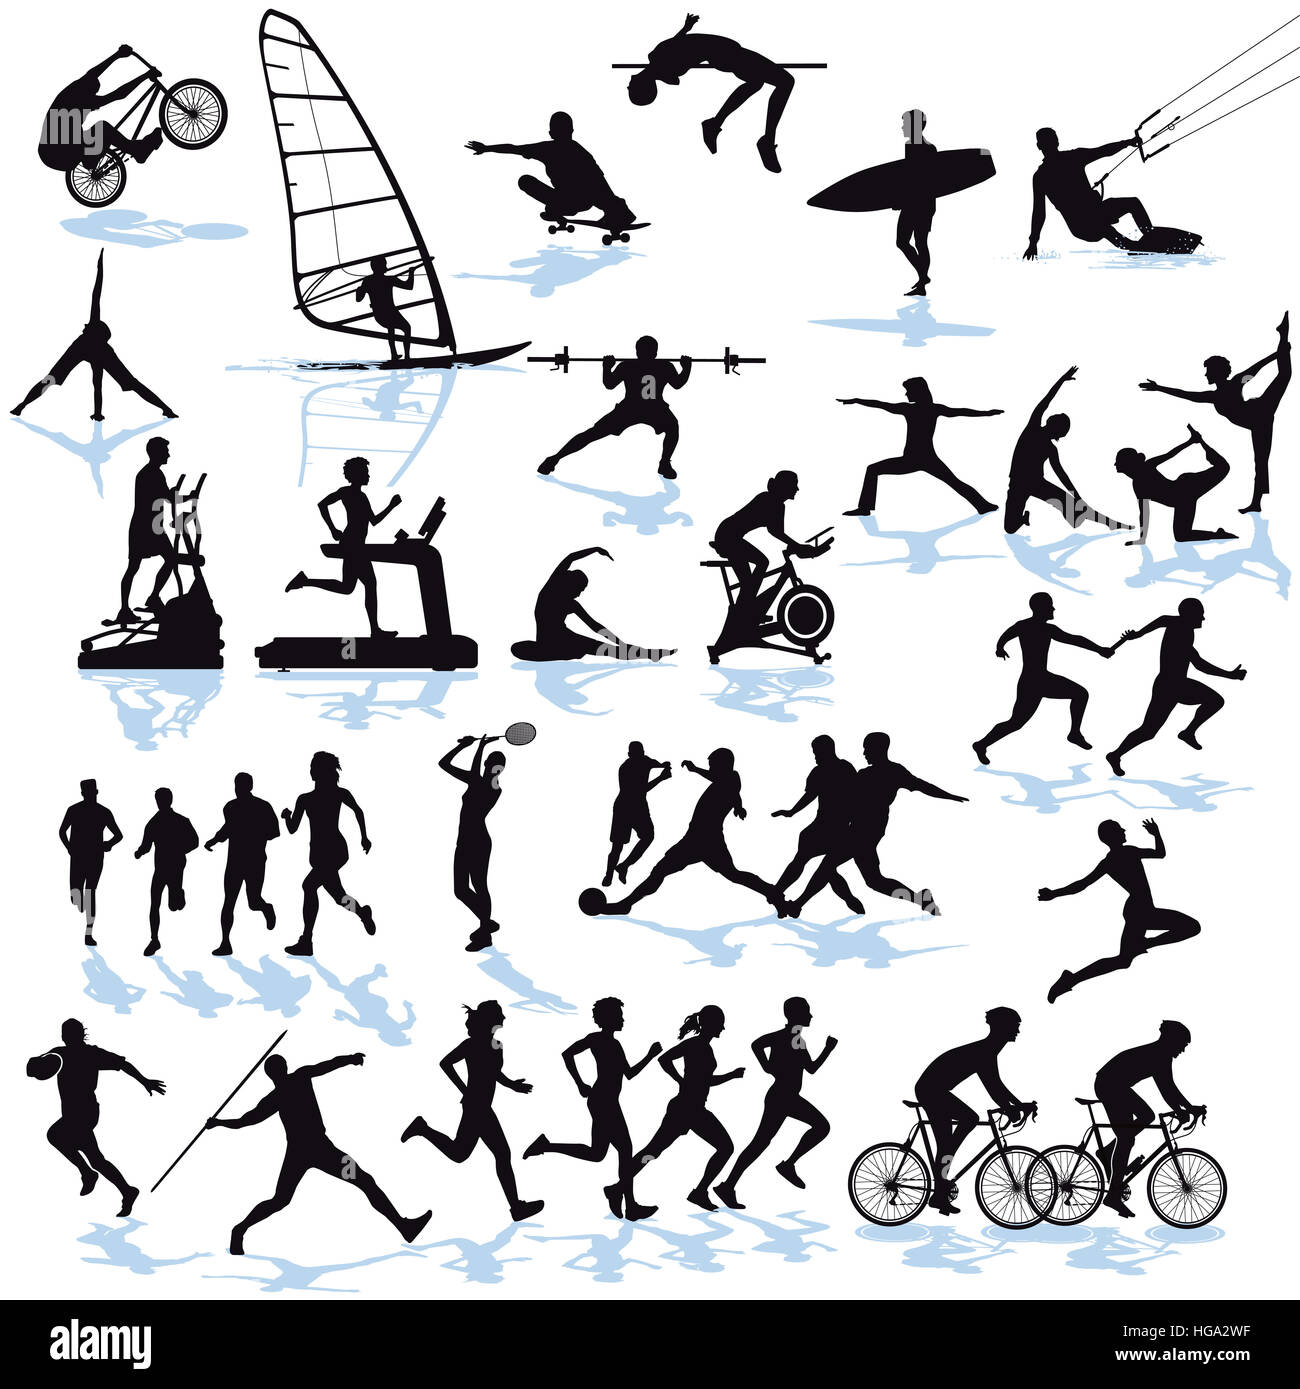 Sport Athletic Illustration Collection Stock Photo